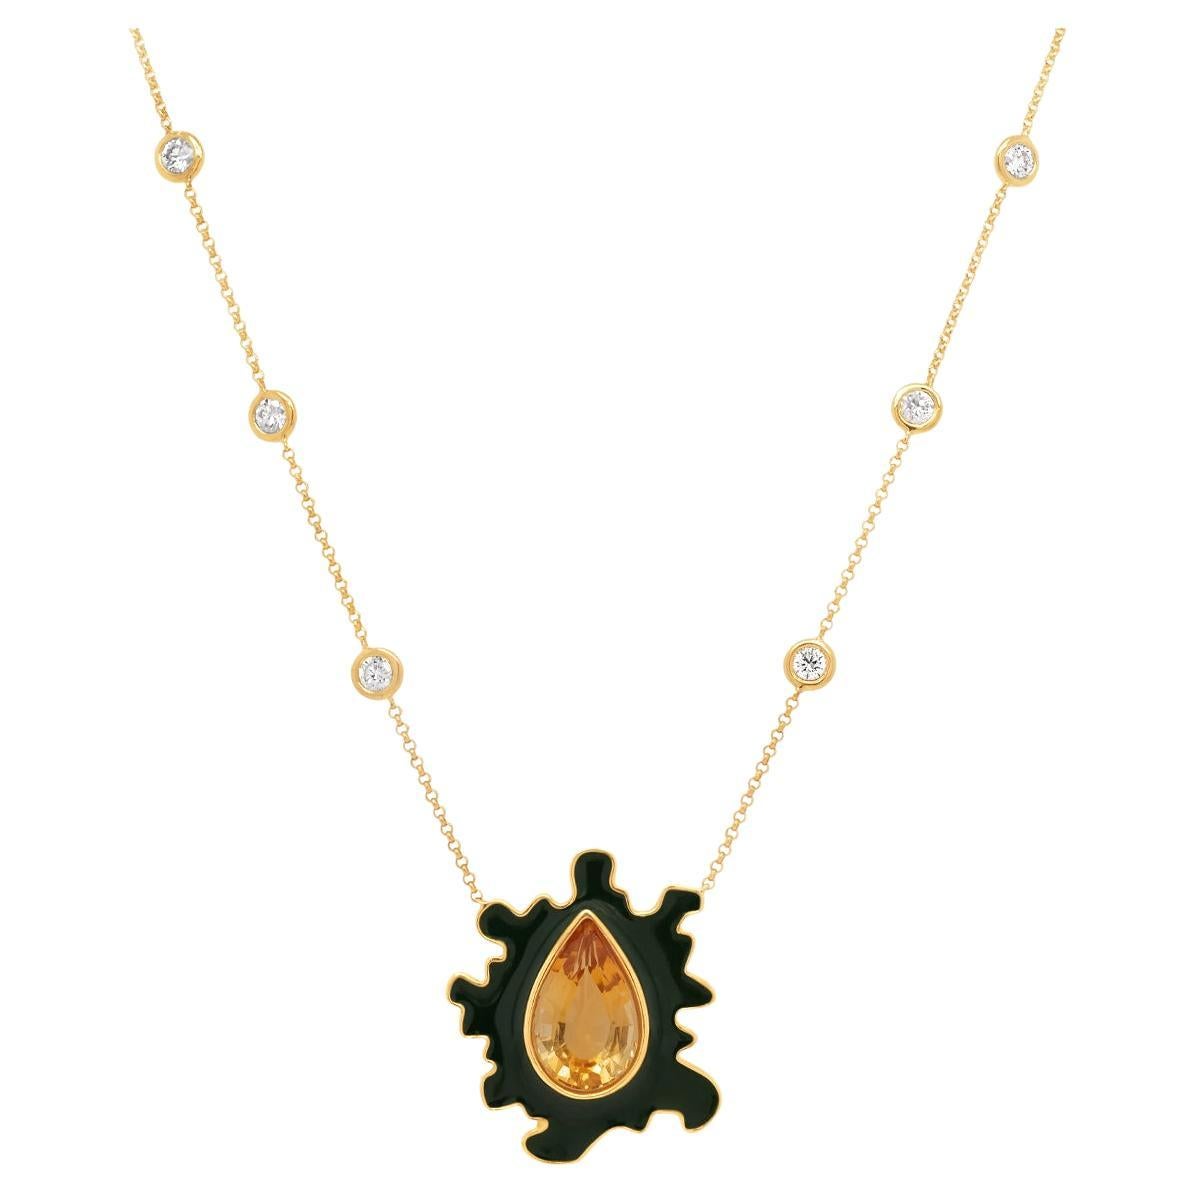 Psychedelic Solitaire Necklace 5.7gms 6.15ctw Citrine and Forest Enamel For Sale